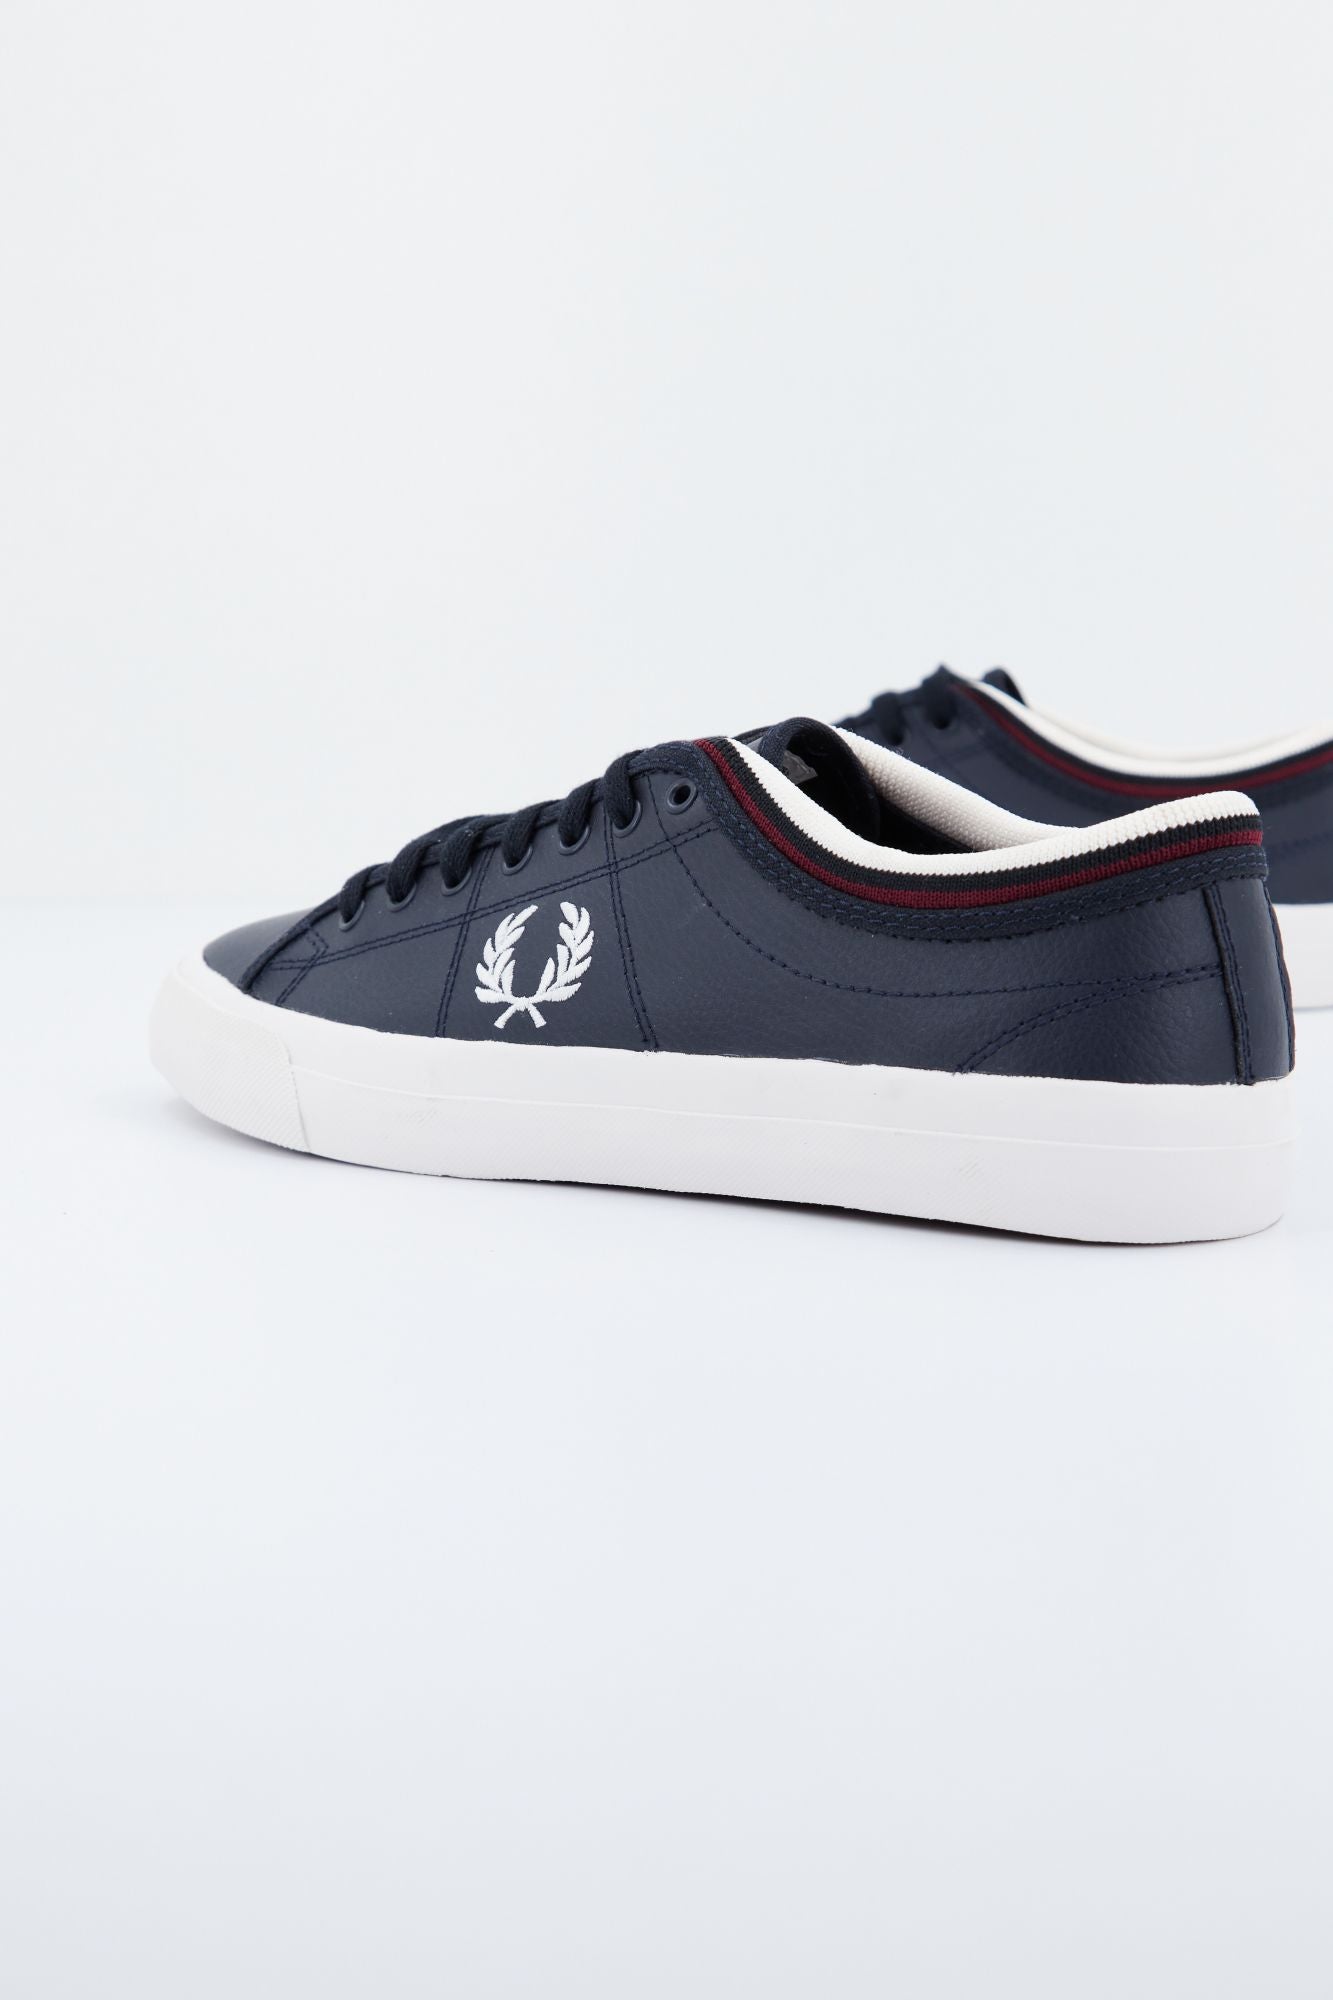 FRED PERRY KENDRICK TIPPED CUF en color AZUL (2)